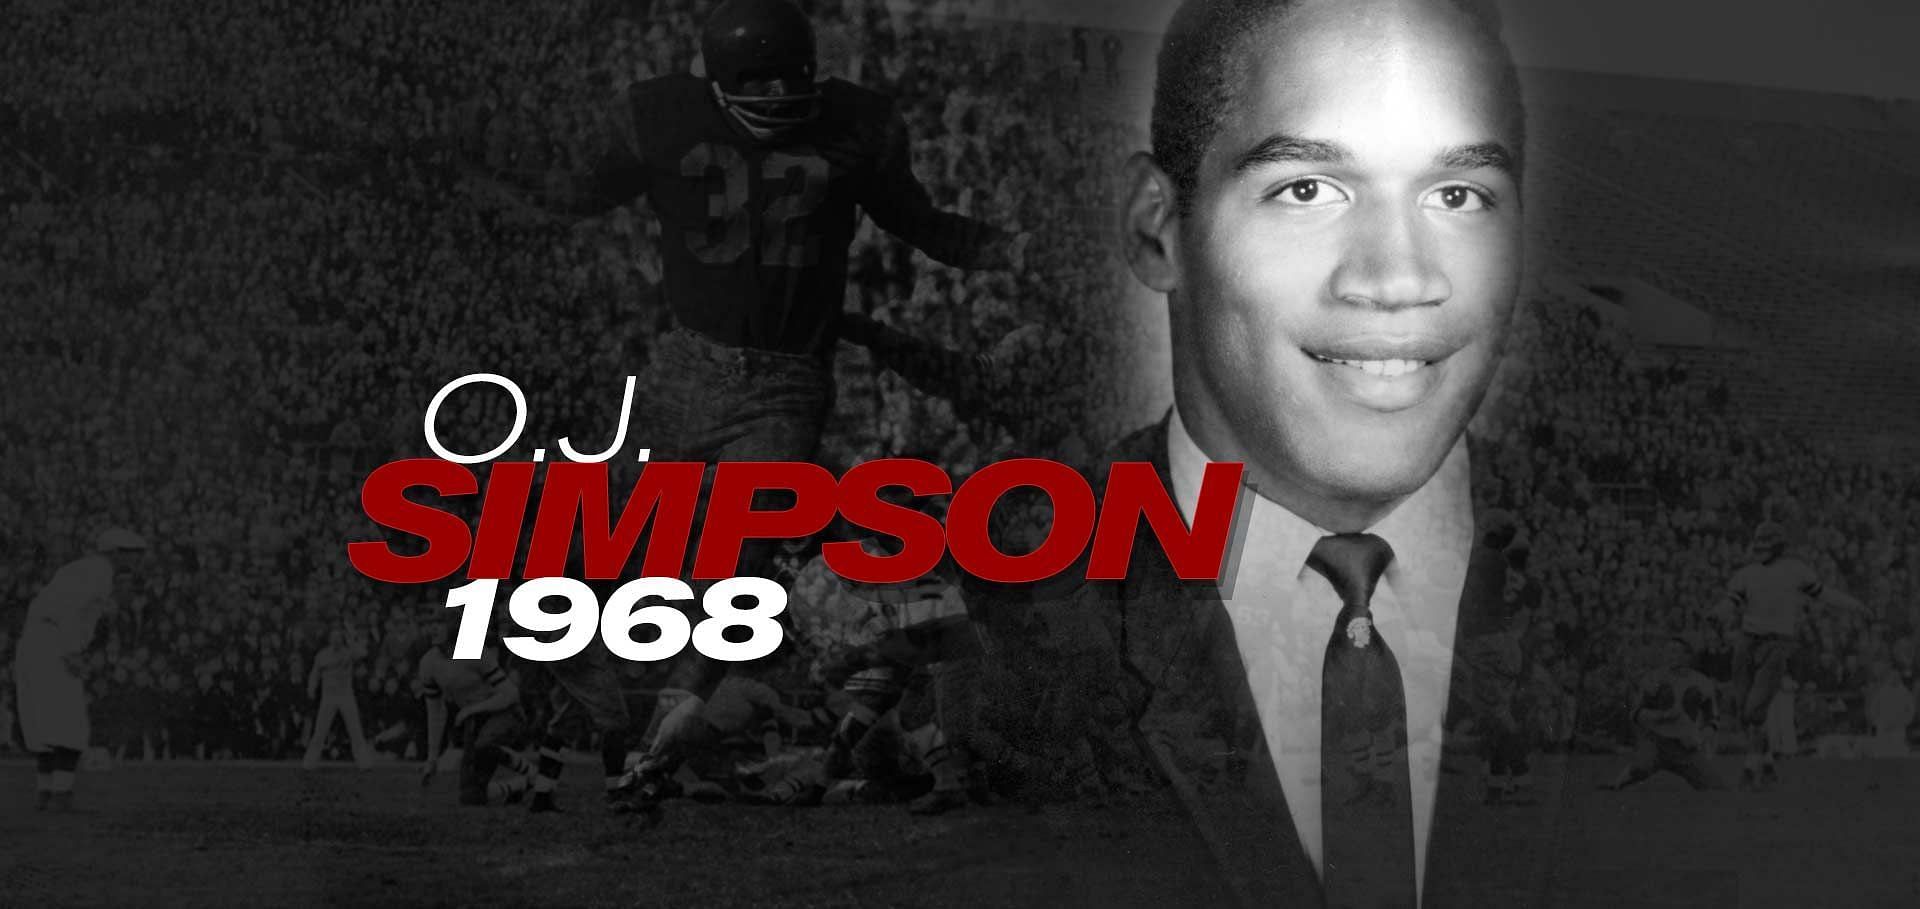 O.J. Simpson won the trophy in 1968